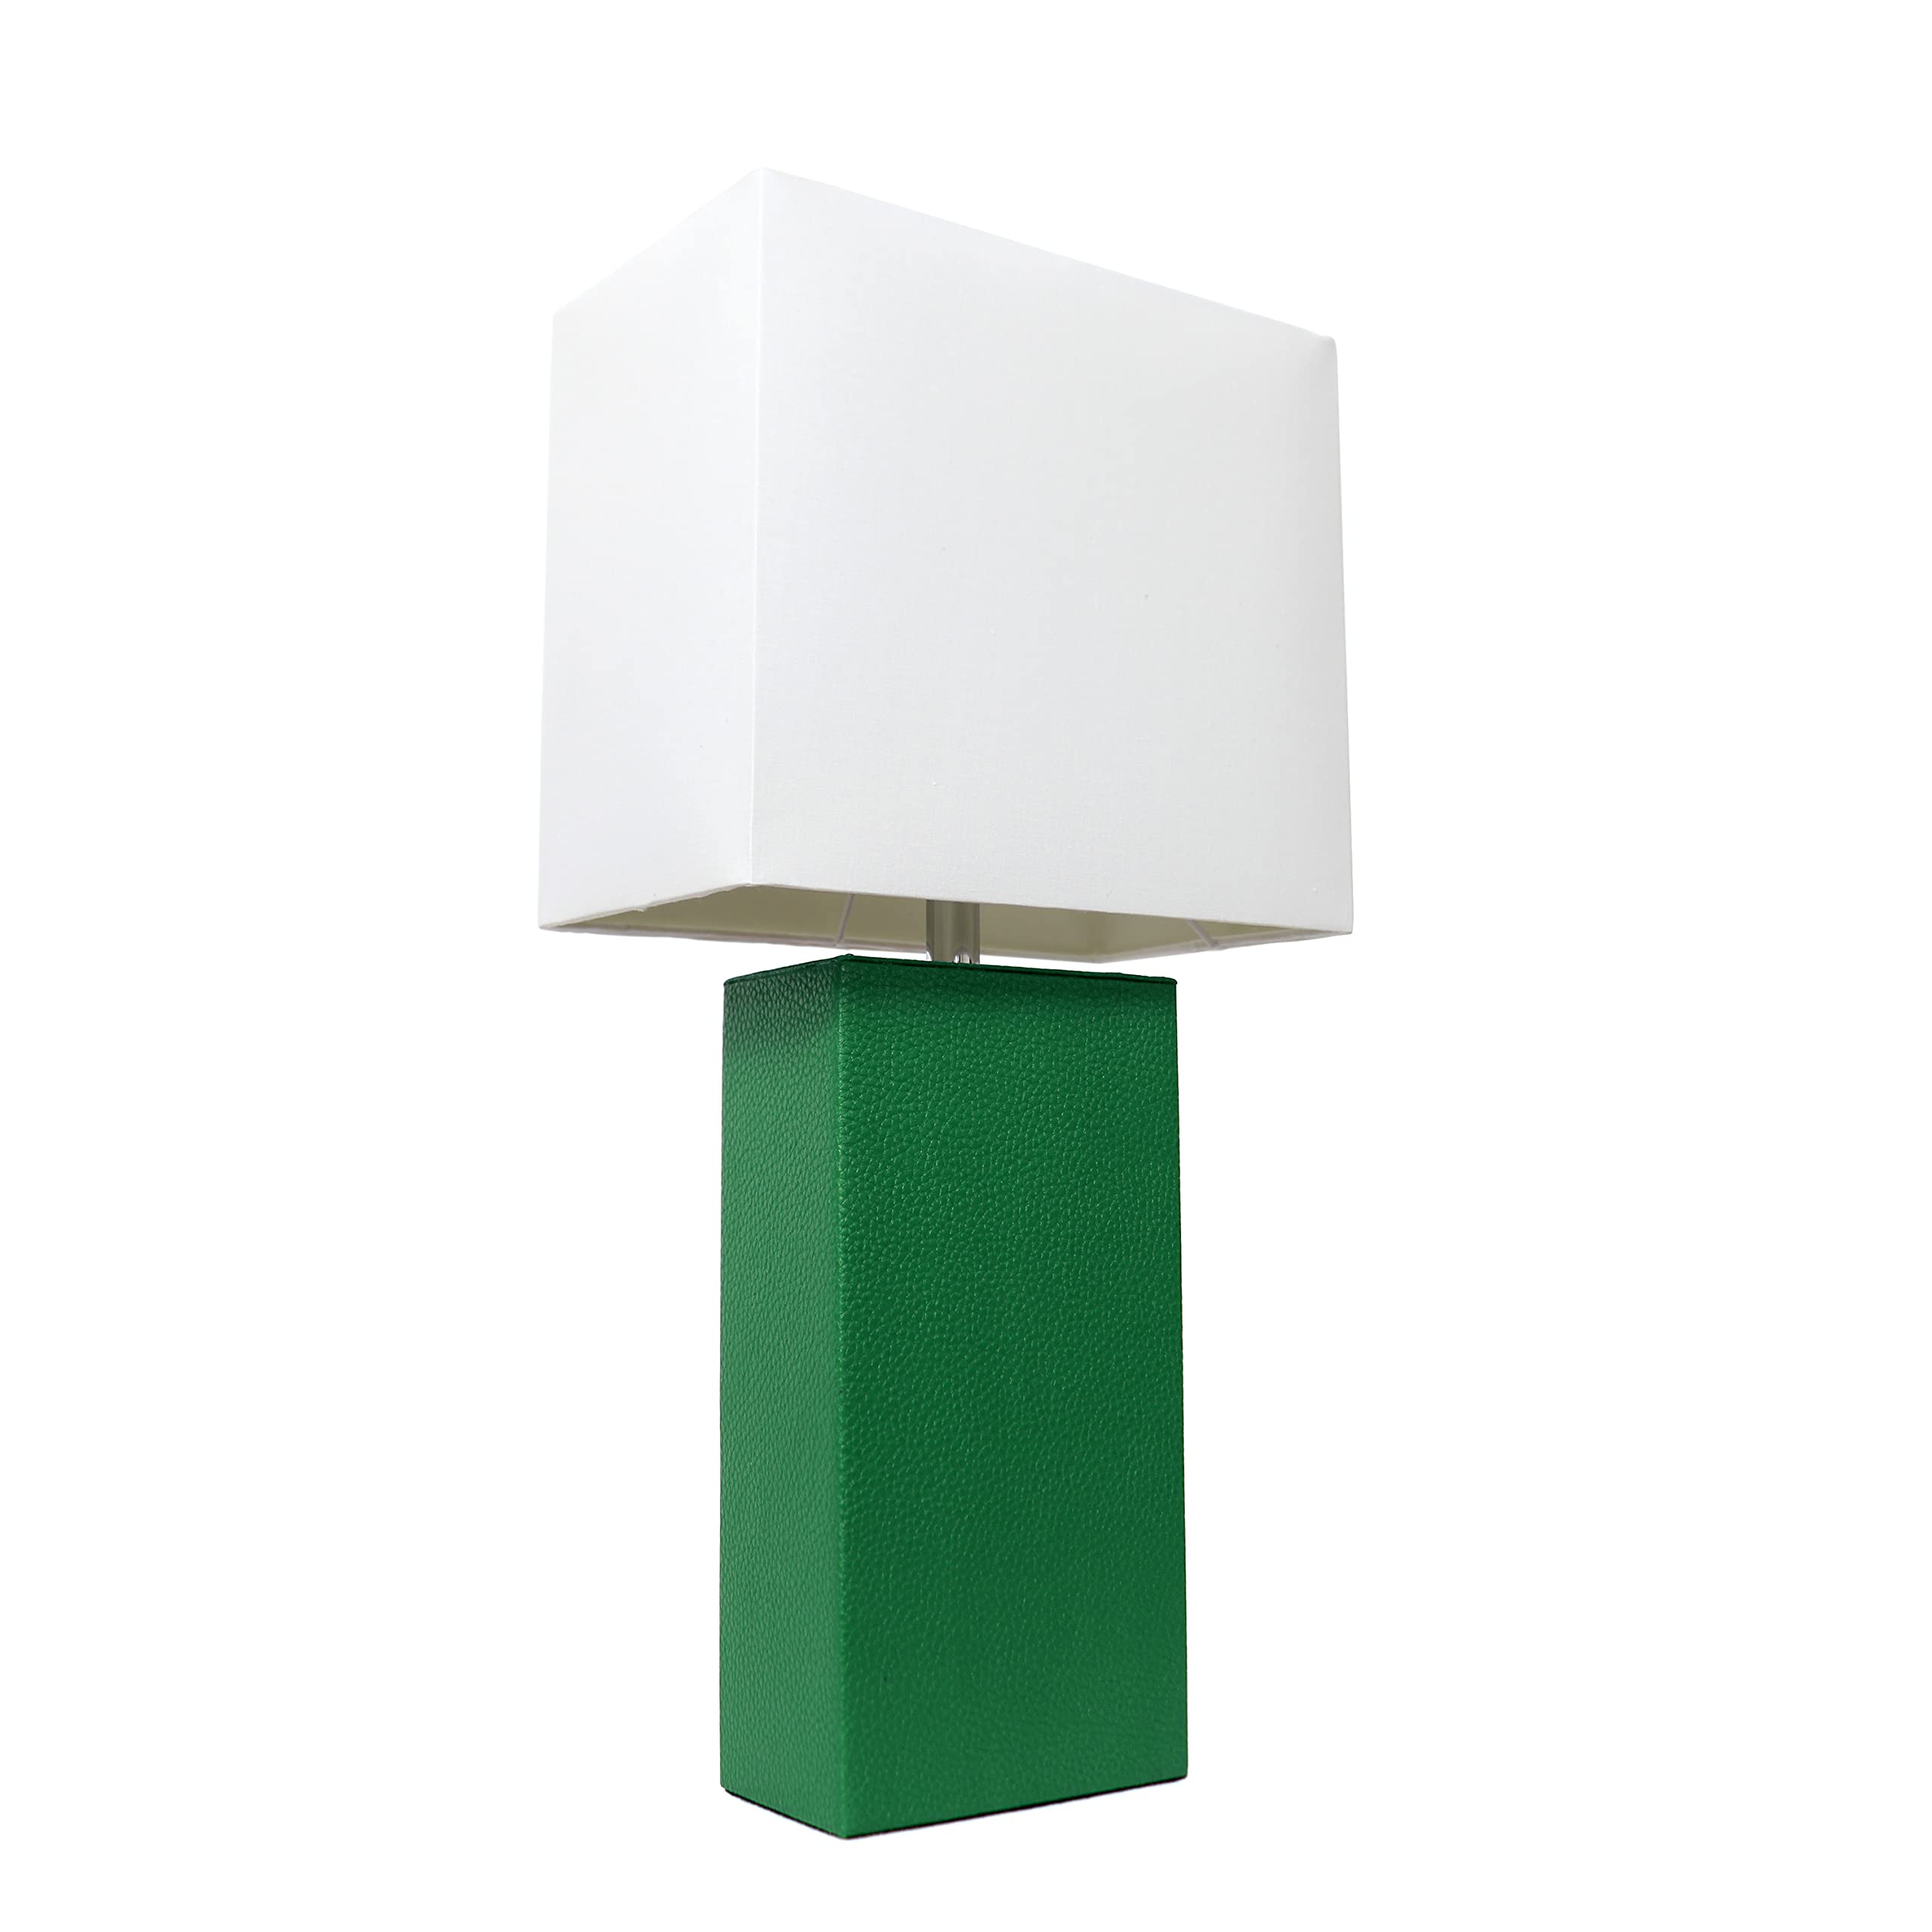 Elegant Designs LT1025-GRN Modern Genuine Leather Table Lamp with White Fabric Shade, Green-(Pack of 4)